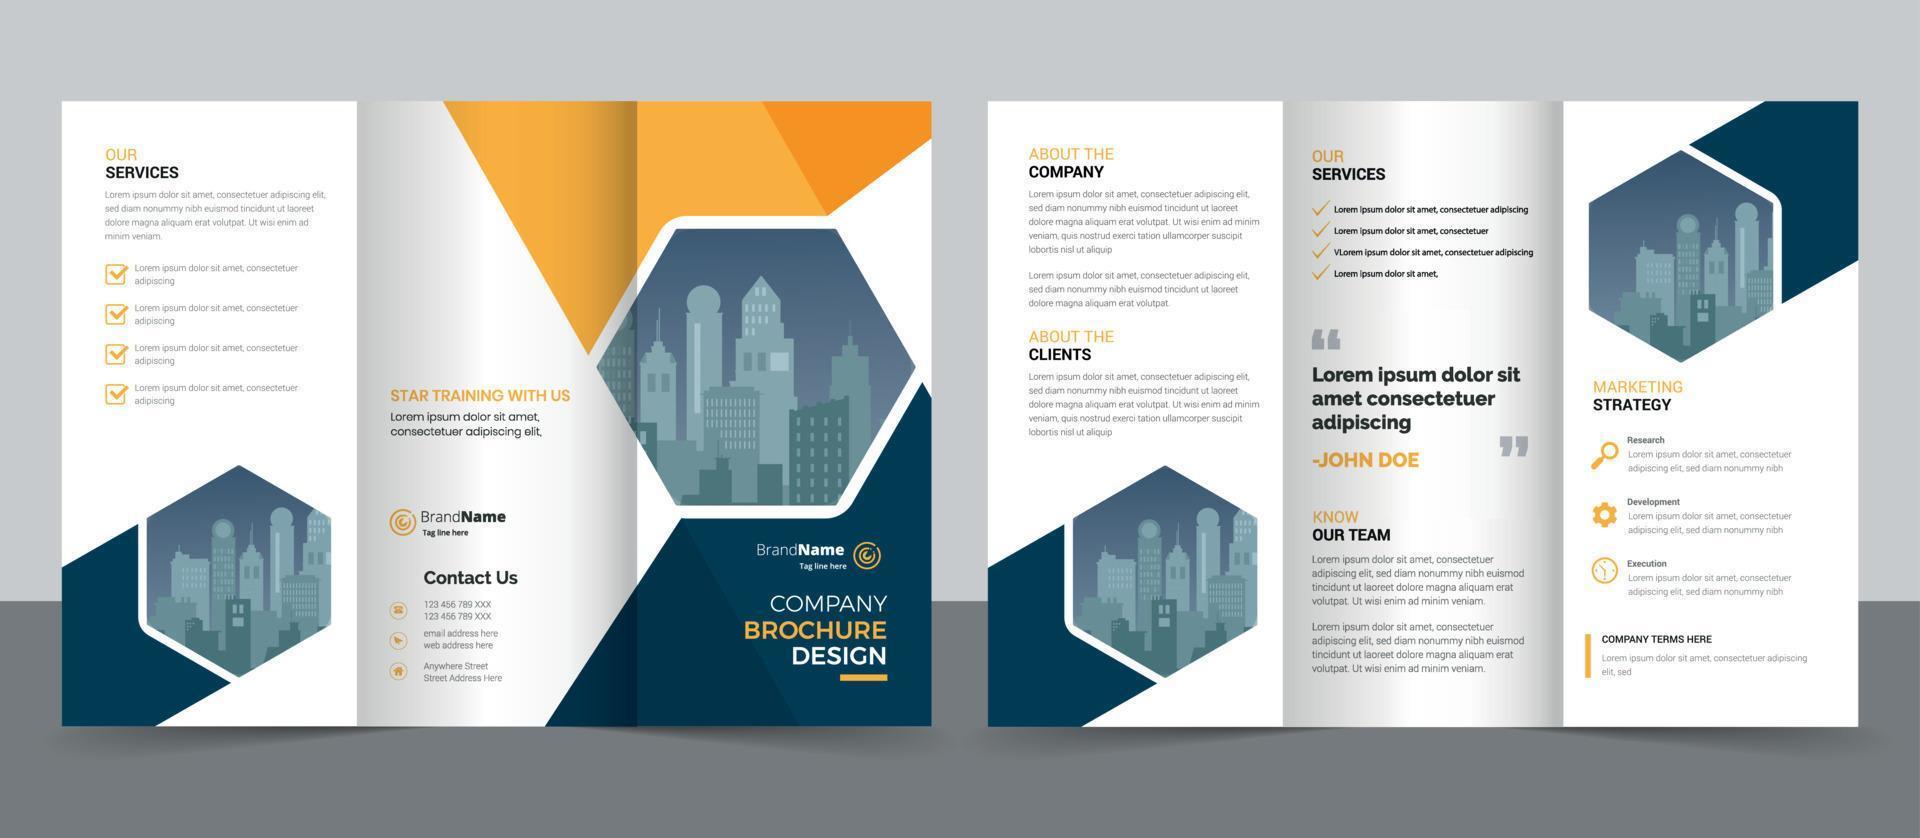 Trifold Brochure Design Template for Your Company, Corporate, Business, Advertising, Marketing, Agency, and Internet Business. vector